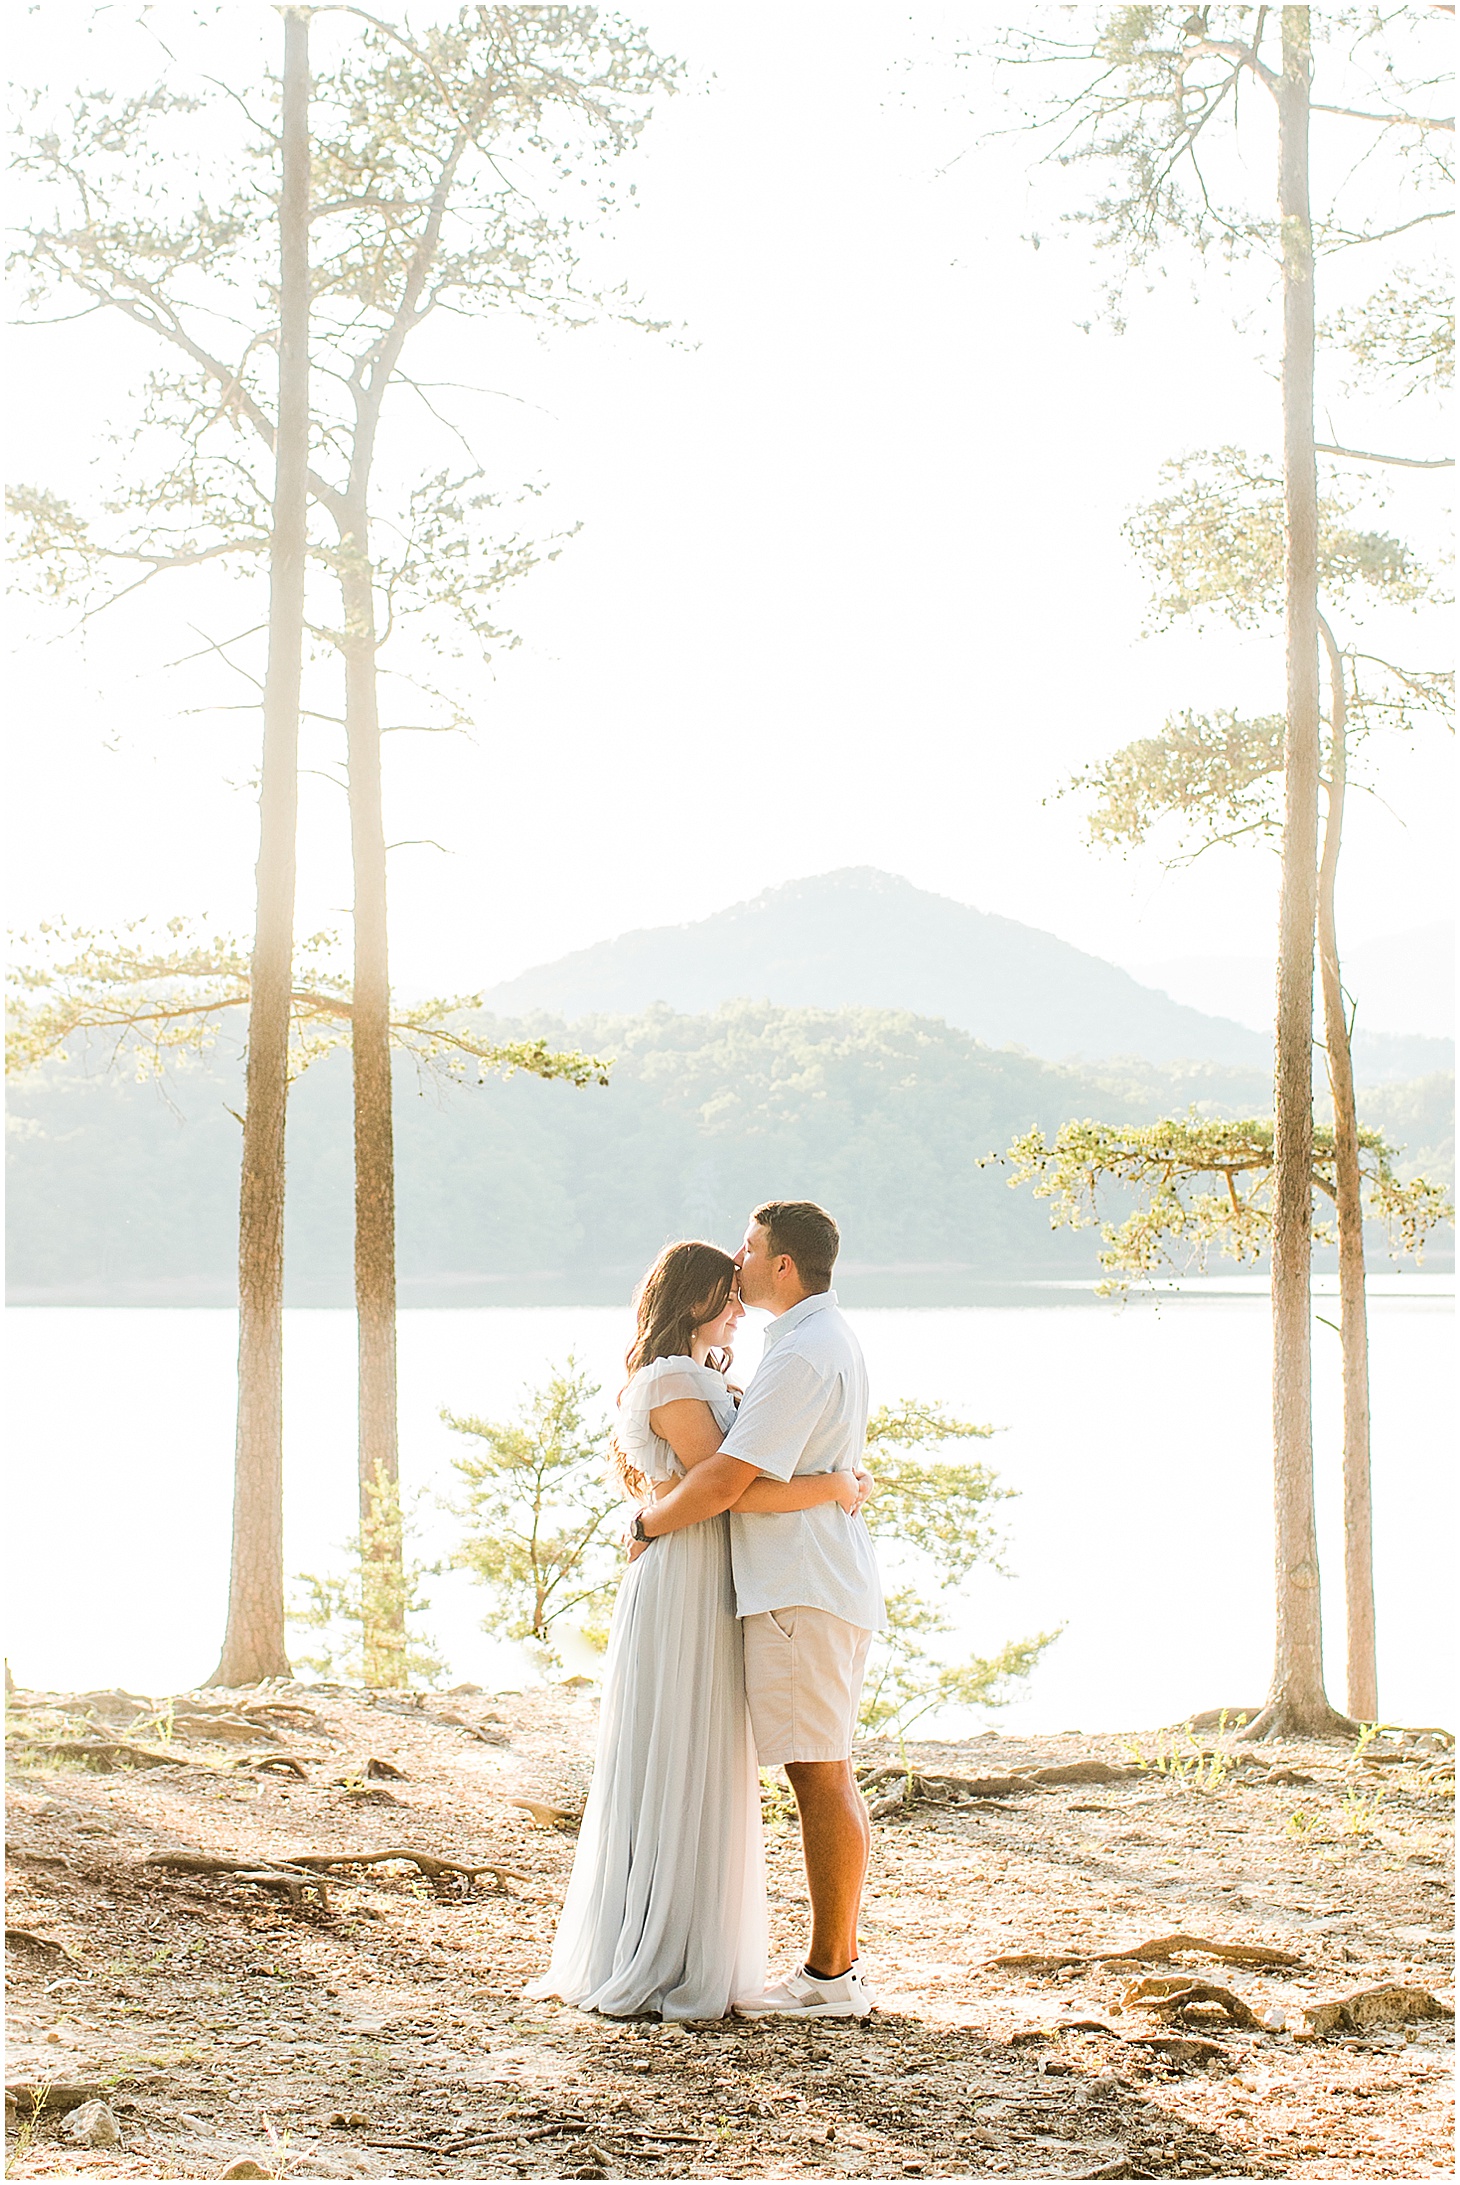 carvinscove_roanokeengagementsession_virginiaweddingphotographer_vaweddingphotographer_photo_0070.jpg